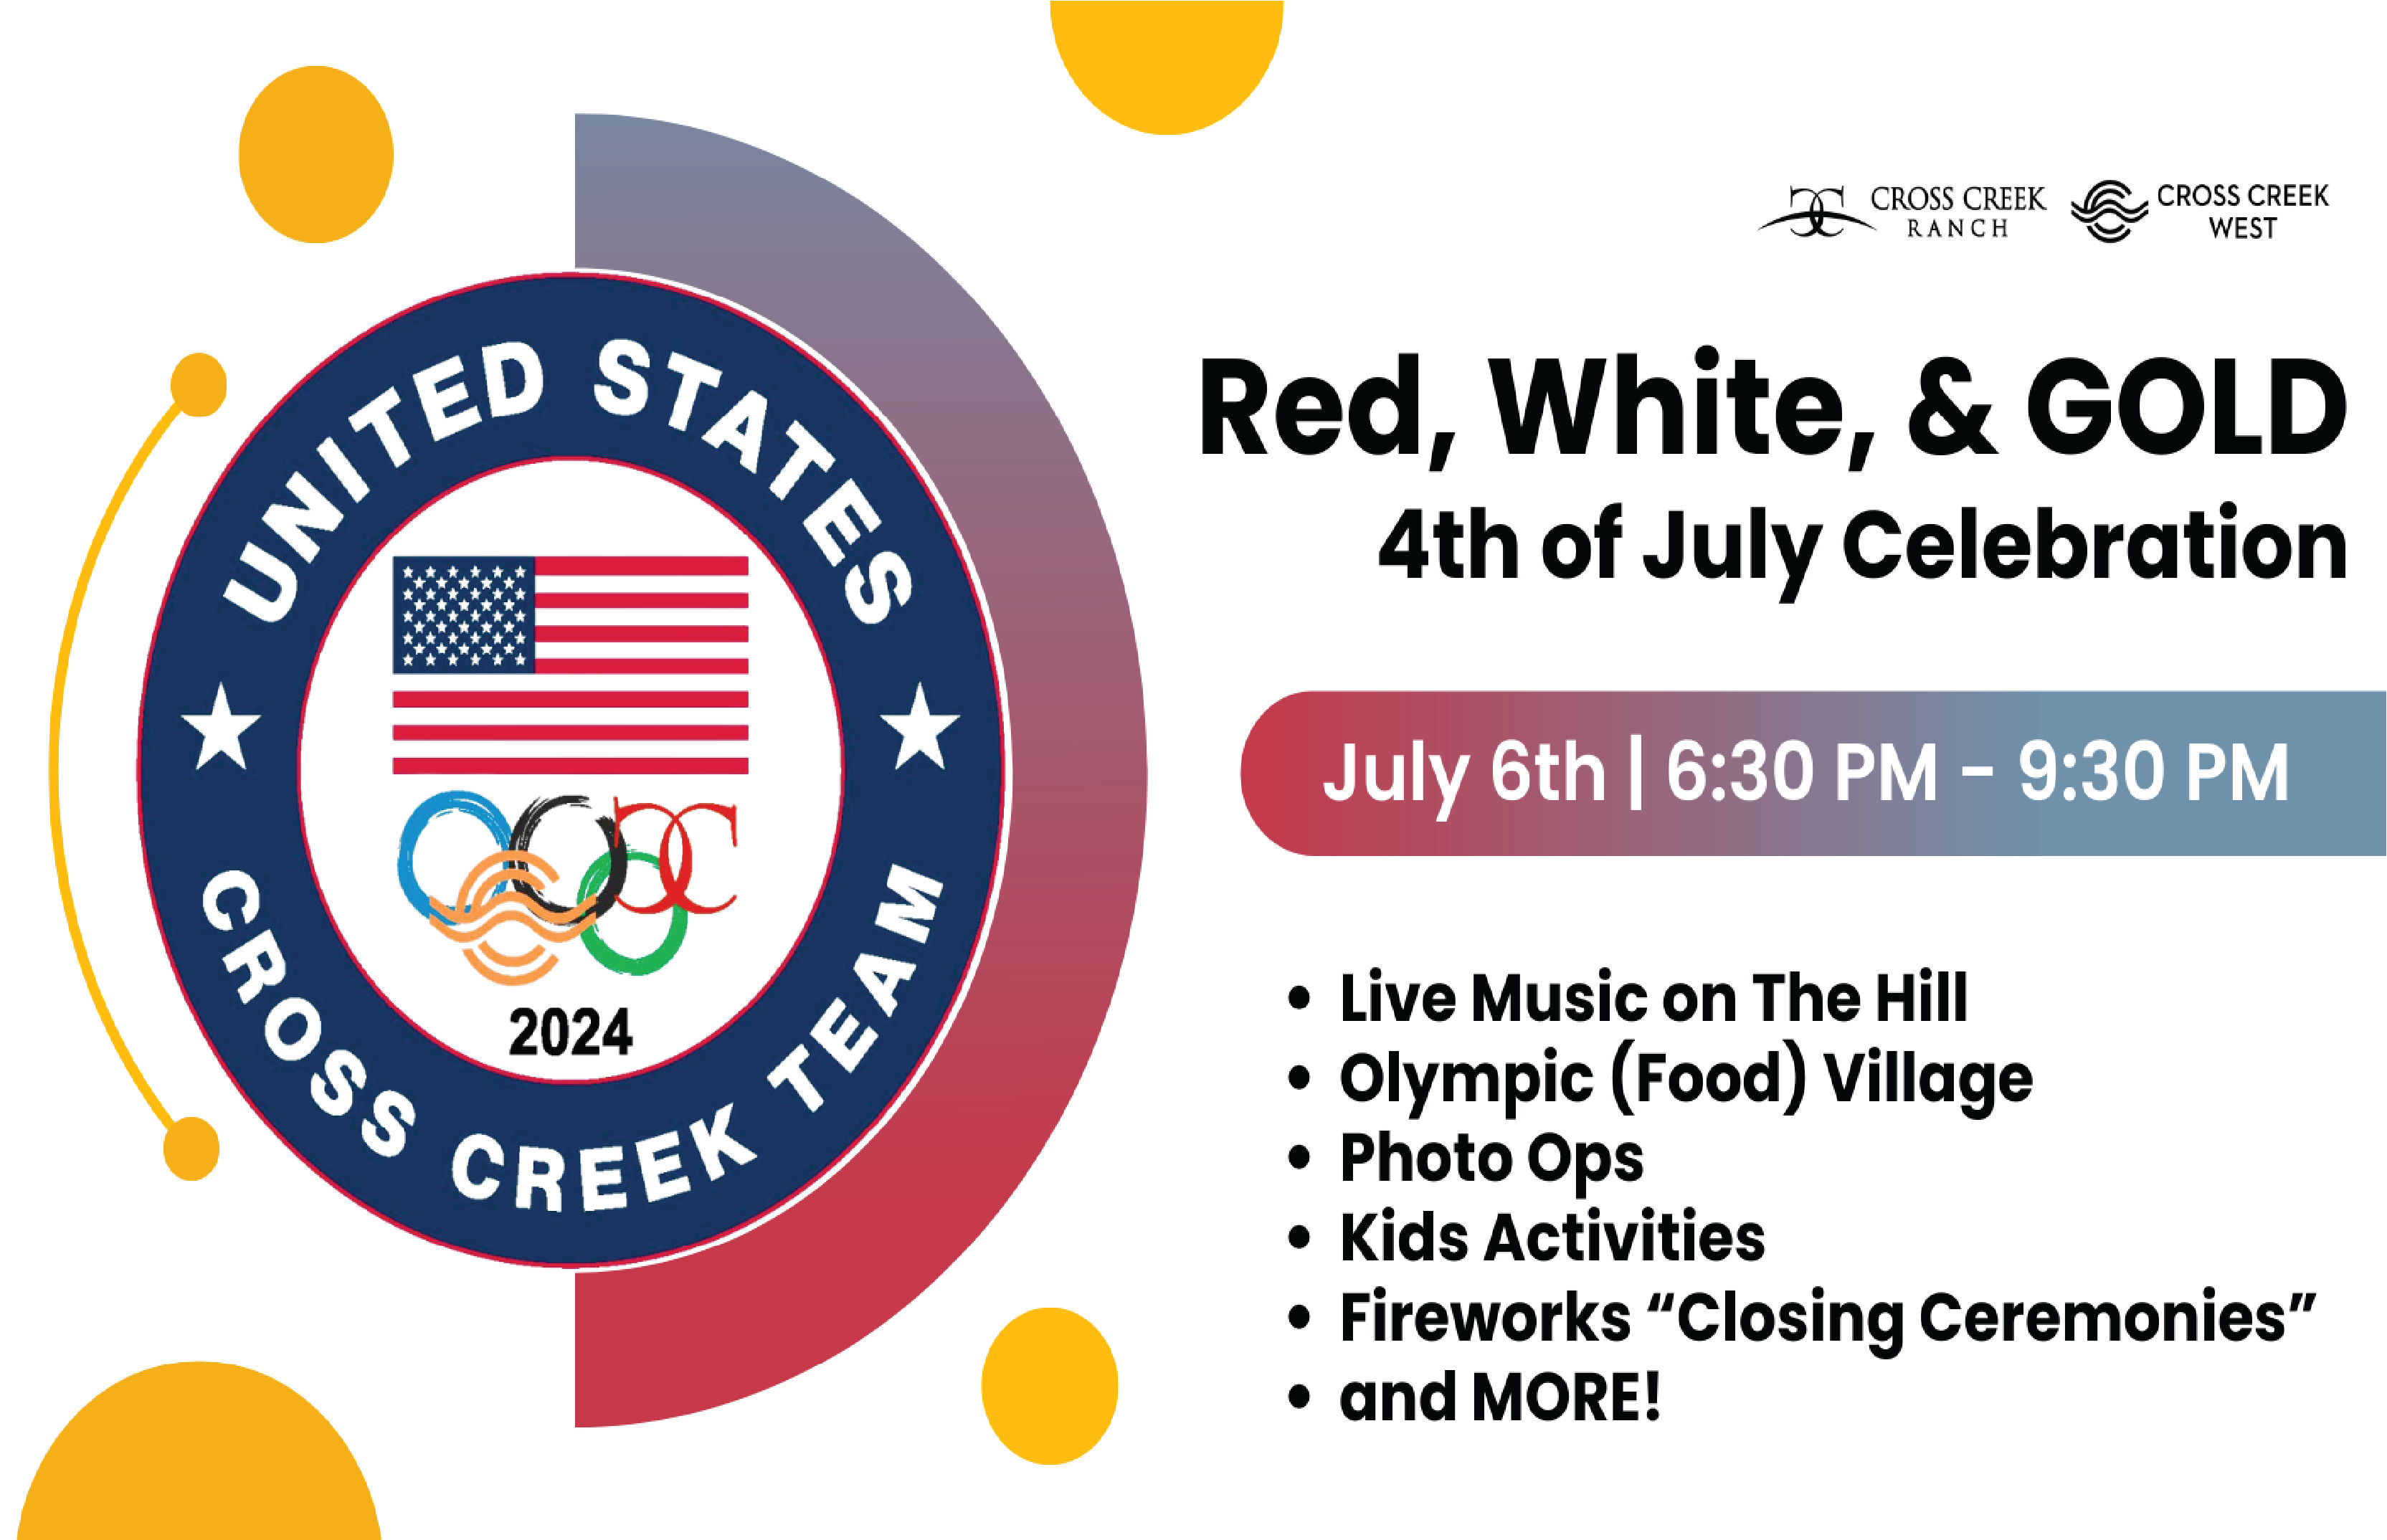 Cross Creek Ranch Red, White, & Gold: 4th of July Celebration